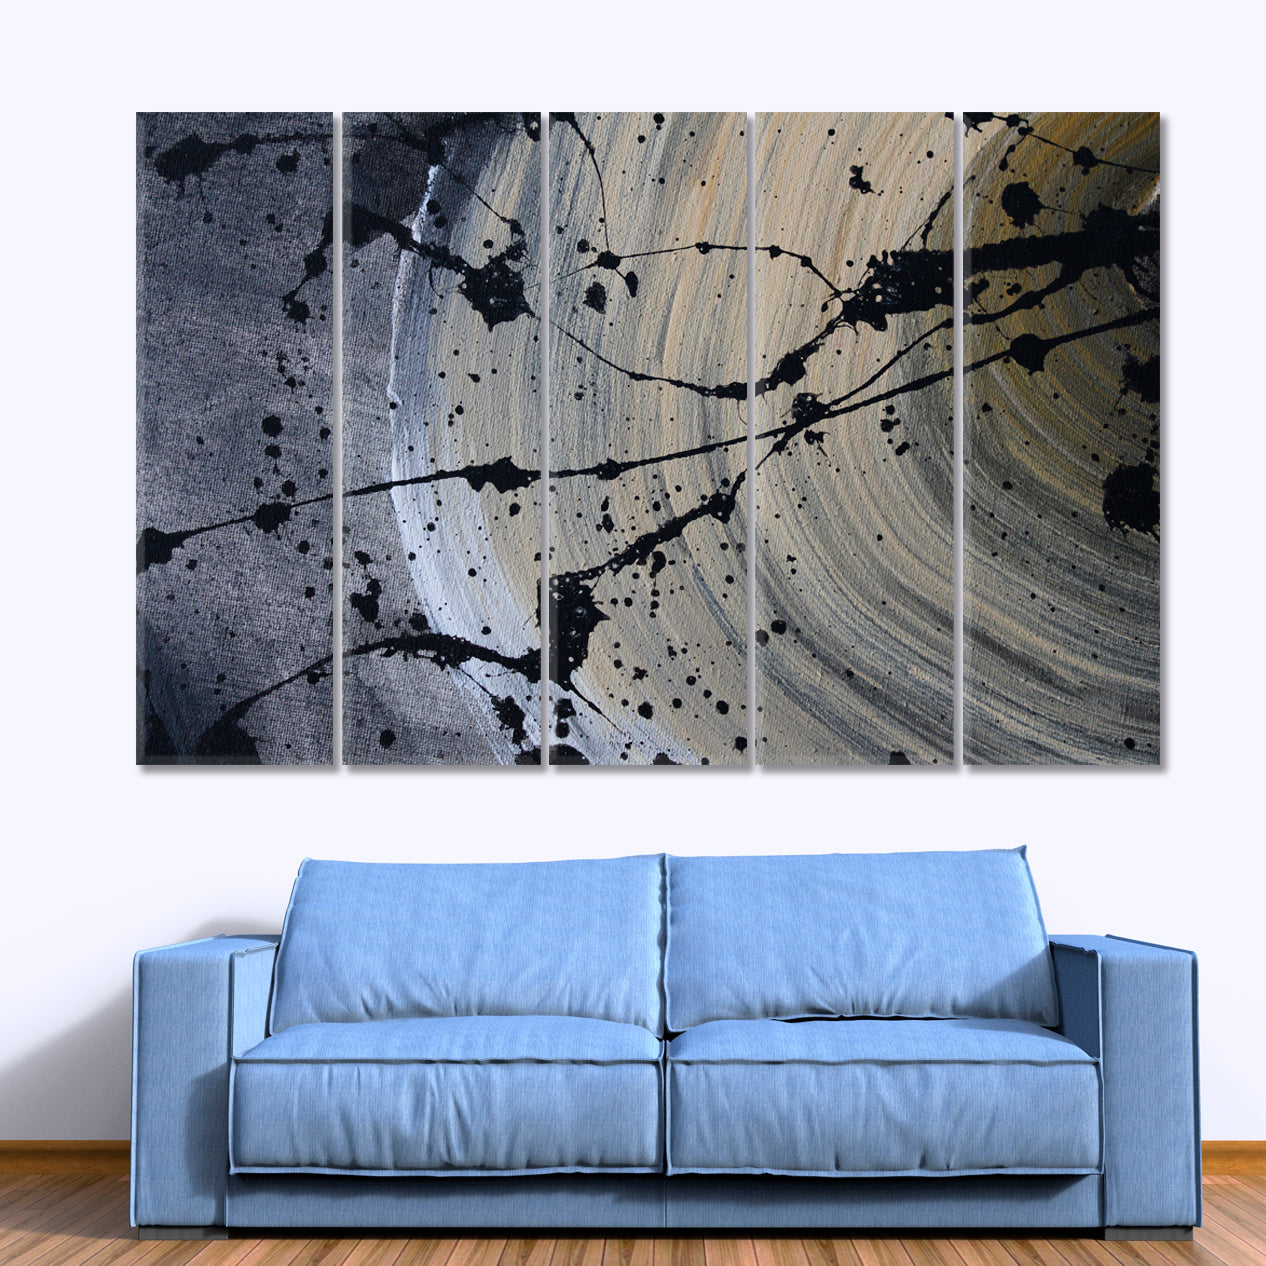 Black Splashes Wide Lines Gray Rough Tough Abstract Modern Art Abstract Art Print Artesty 5 panels 36" x 24" 